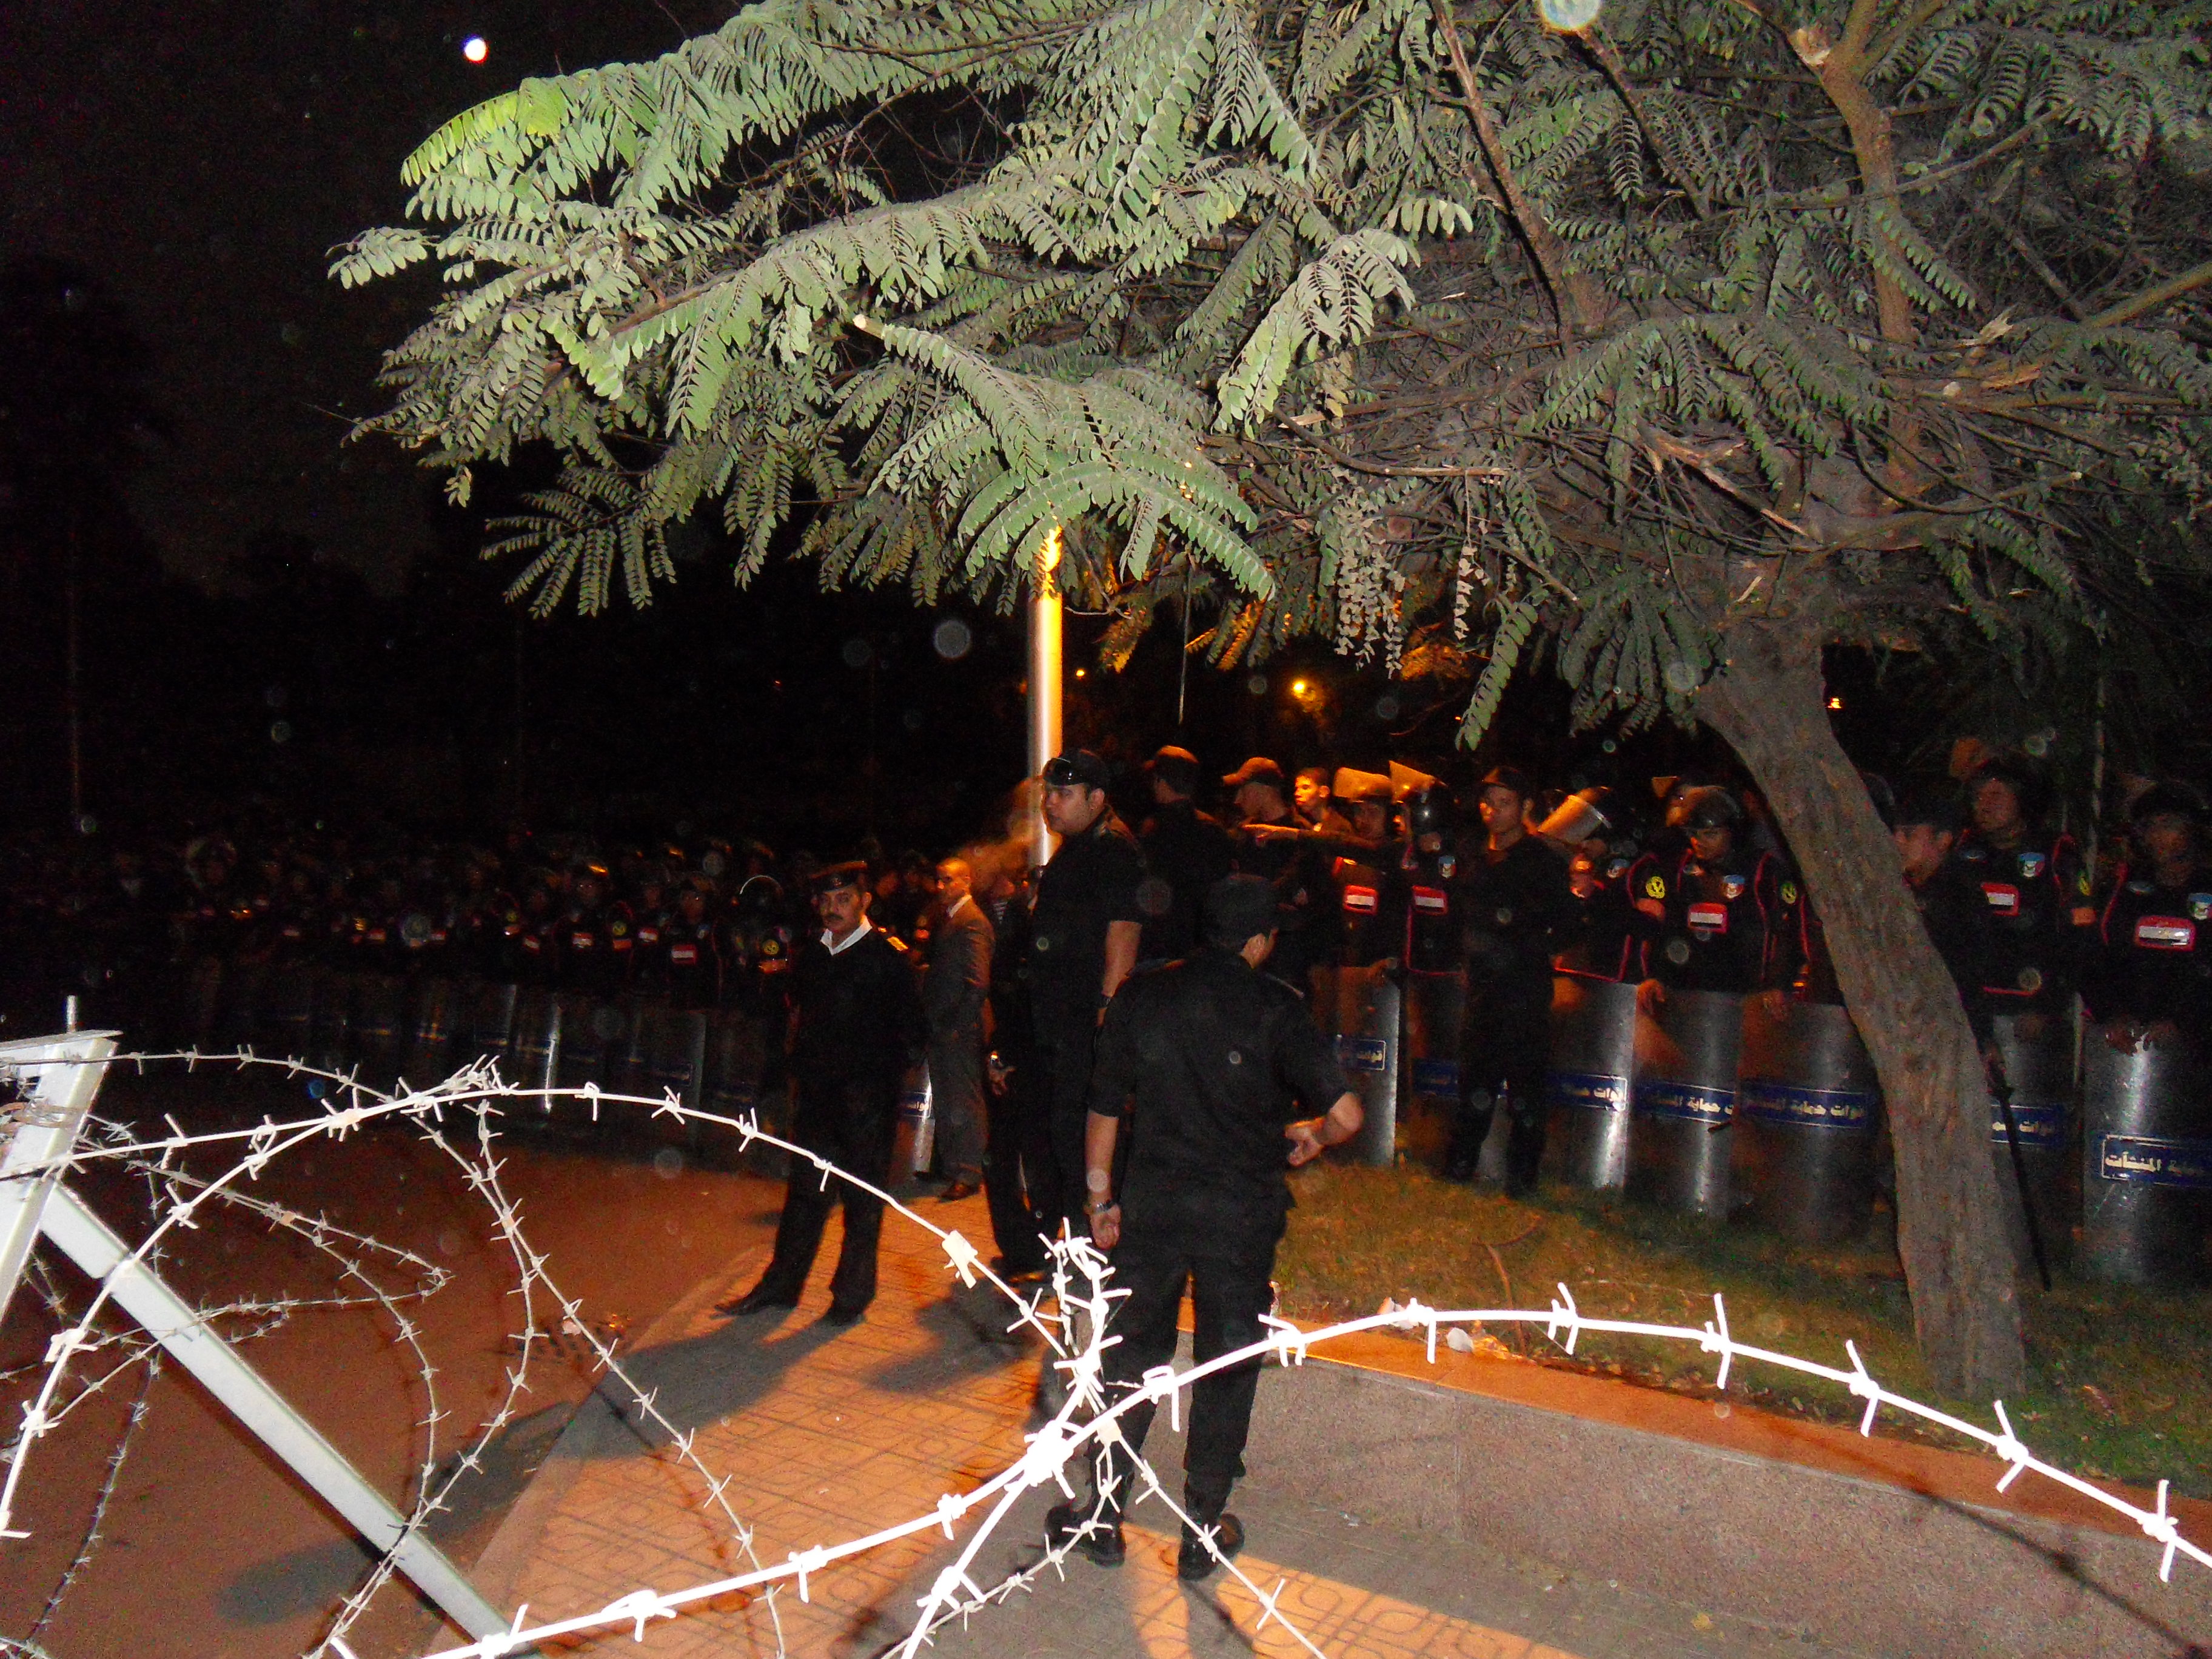 Security Forces blocking the road. People were talking with the officers across the barbed wire.